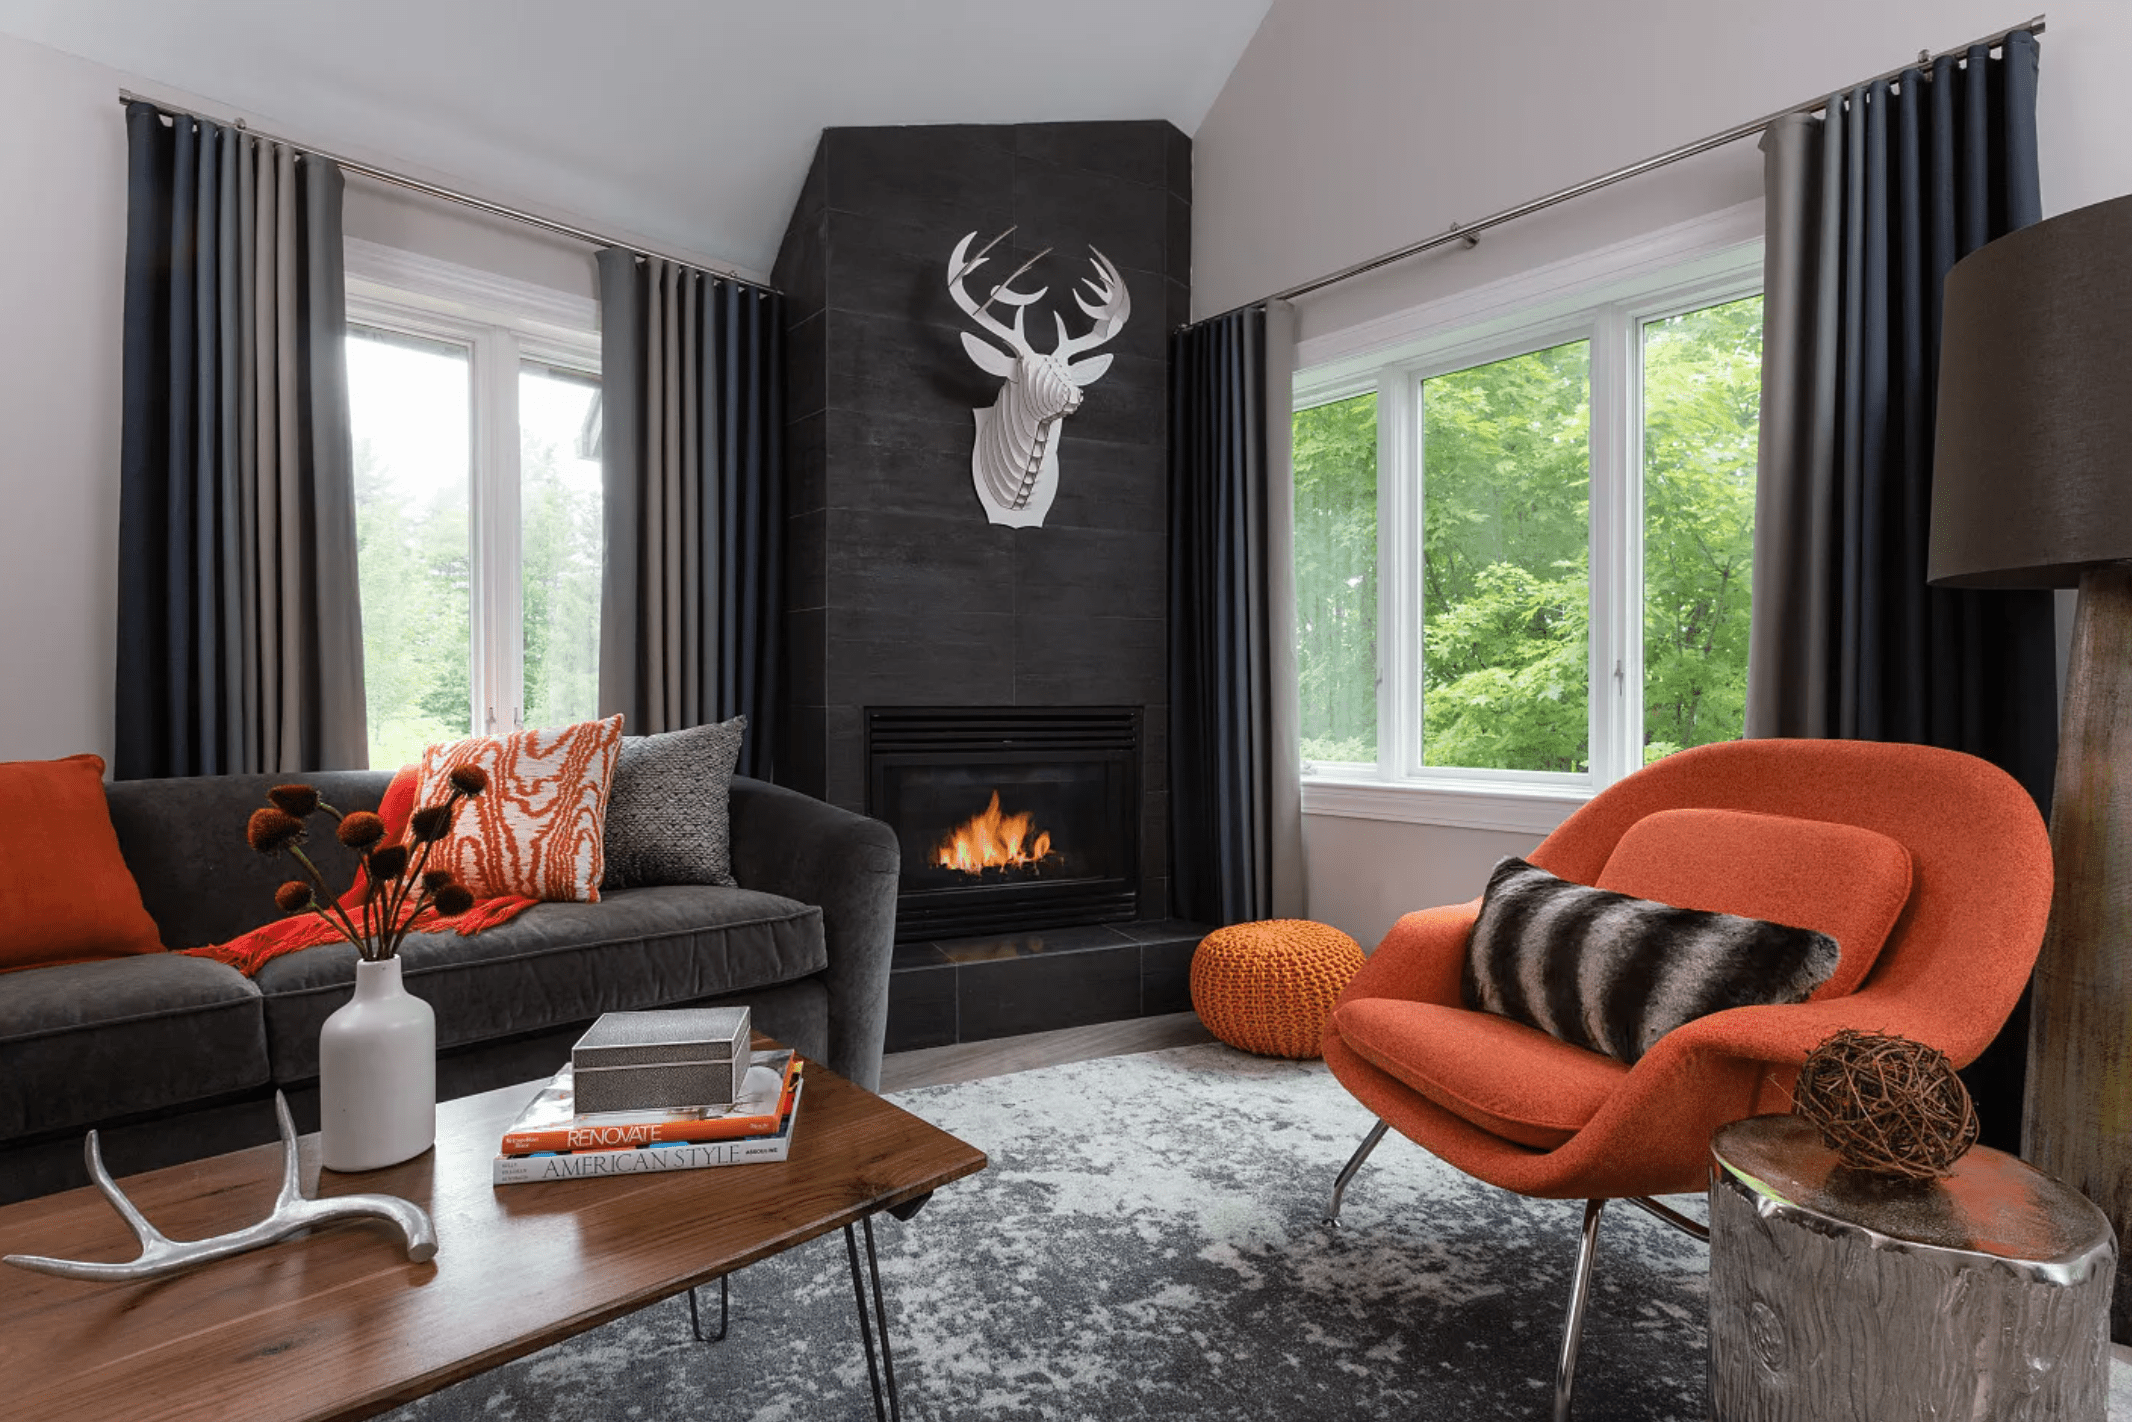 Field Guide Lodge Fireplace with Deer Mantle